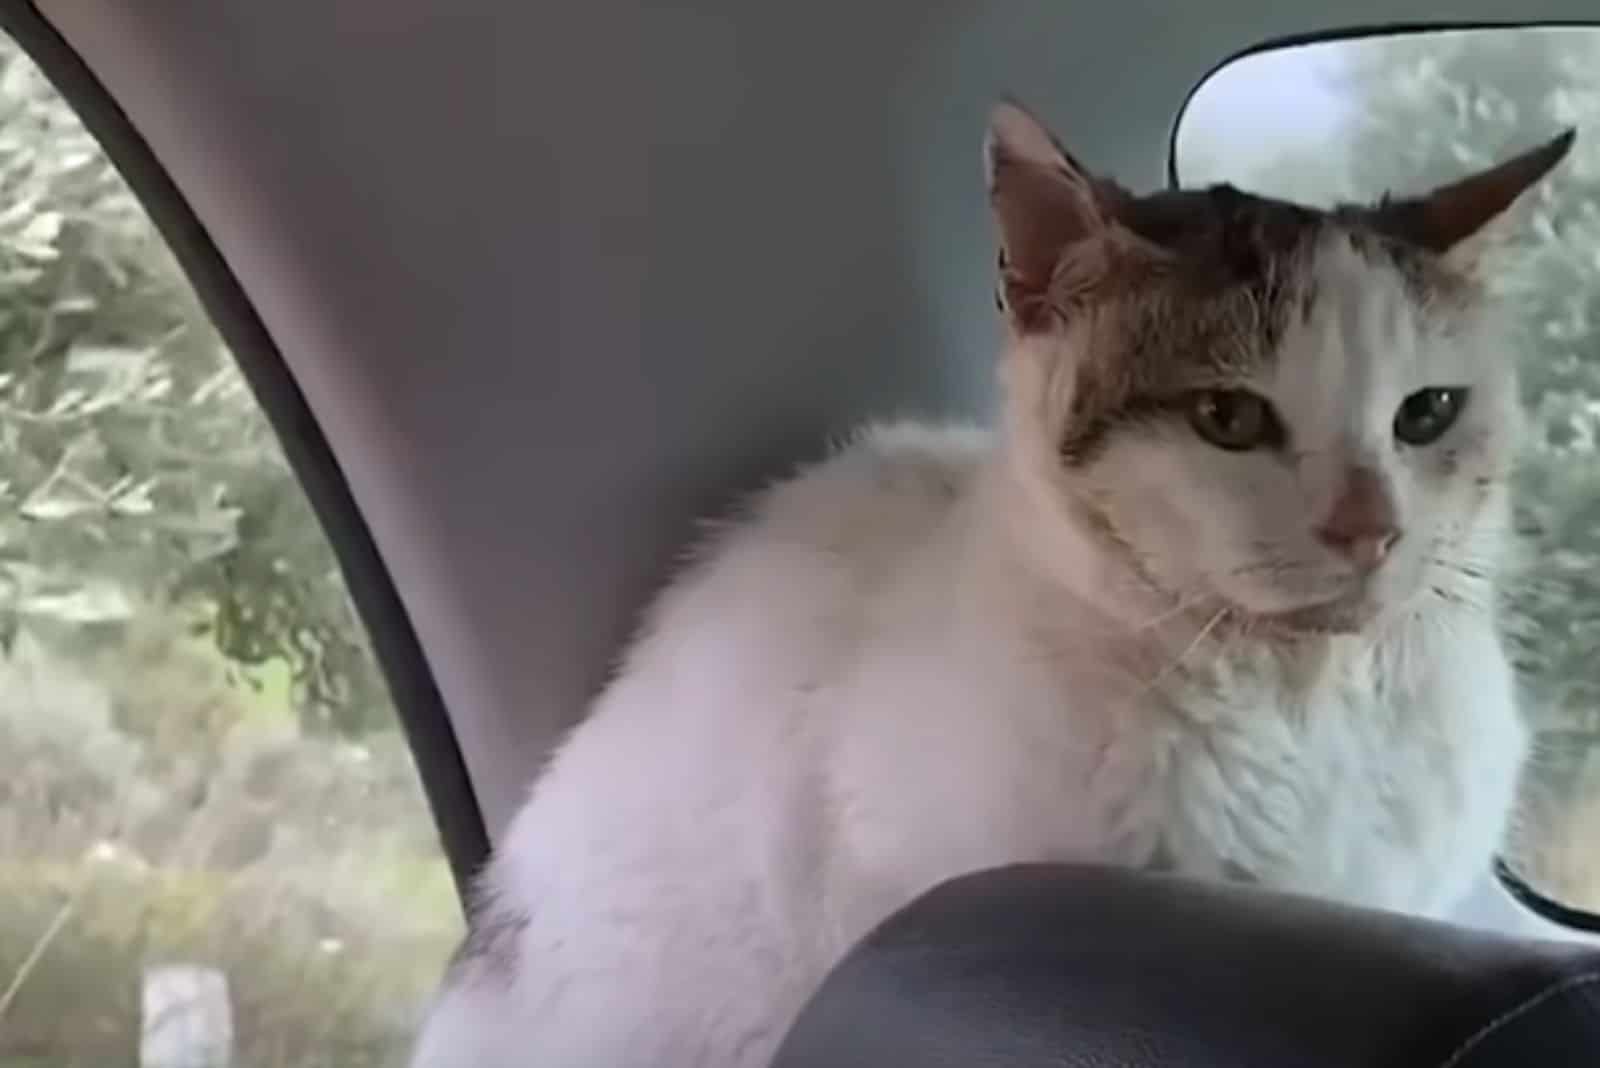 the cat is sitting in the car at the back